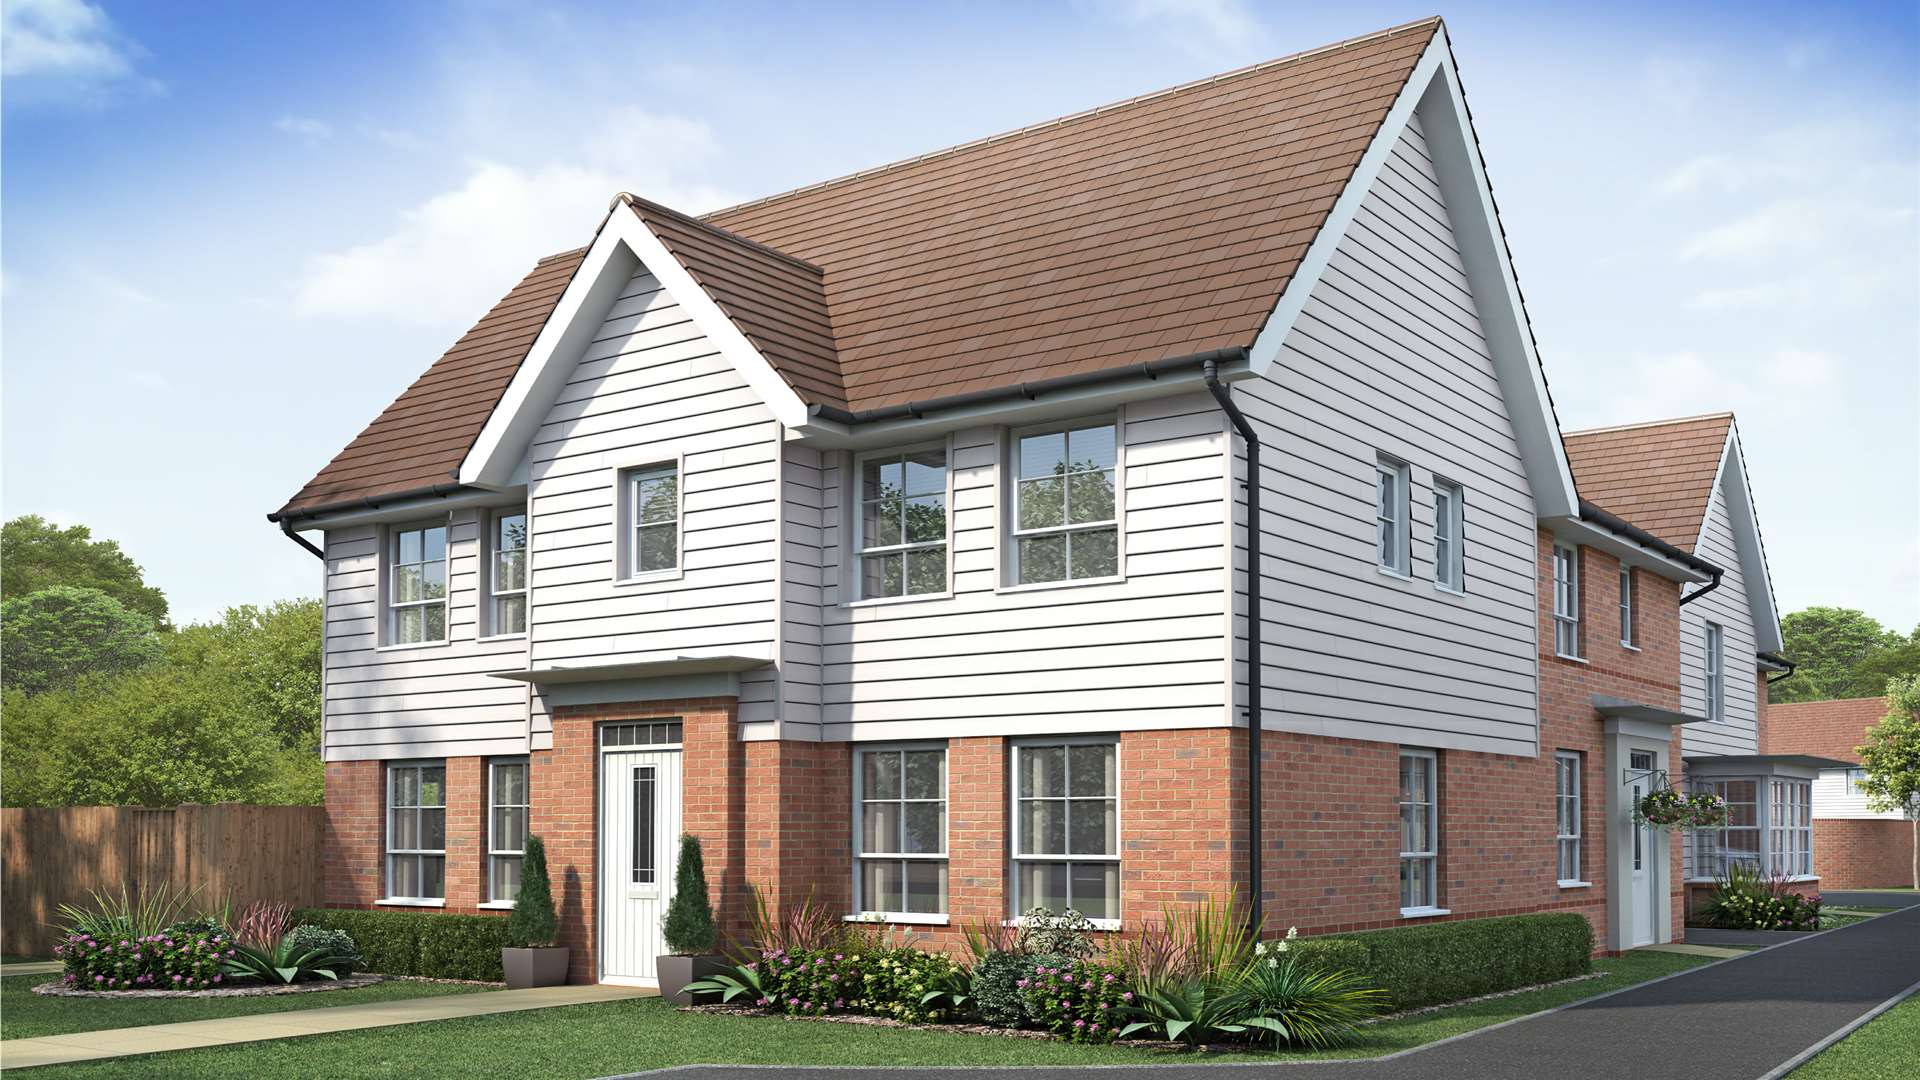 A CGI of one of the new homes at Barratt's The Orchards development set to open in Maidstone this year